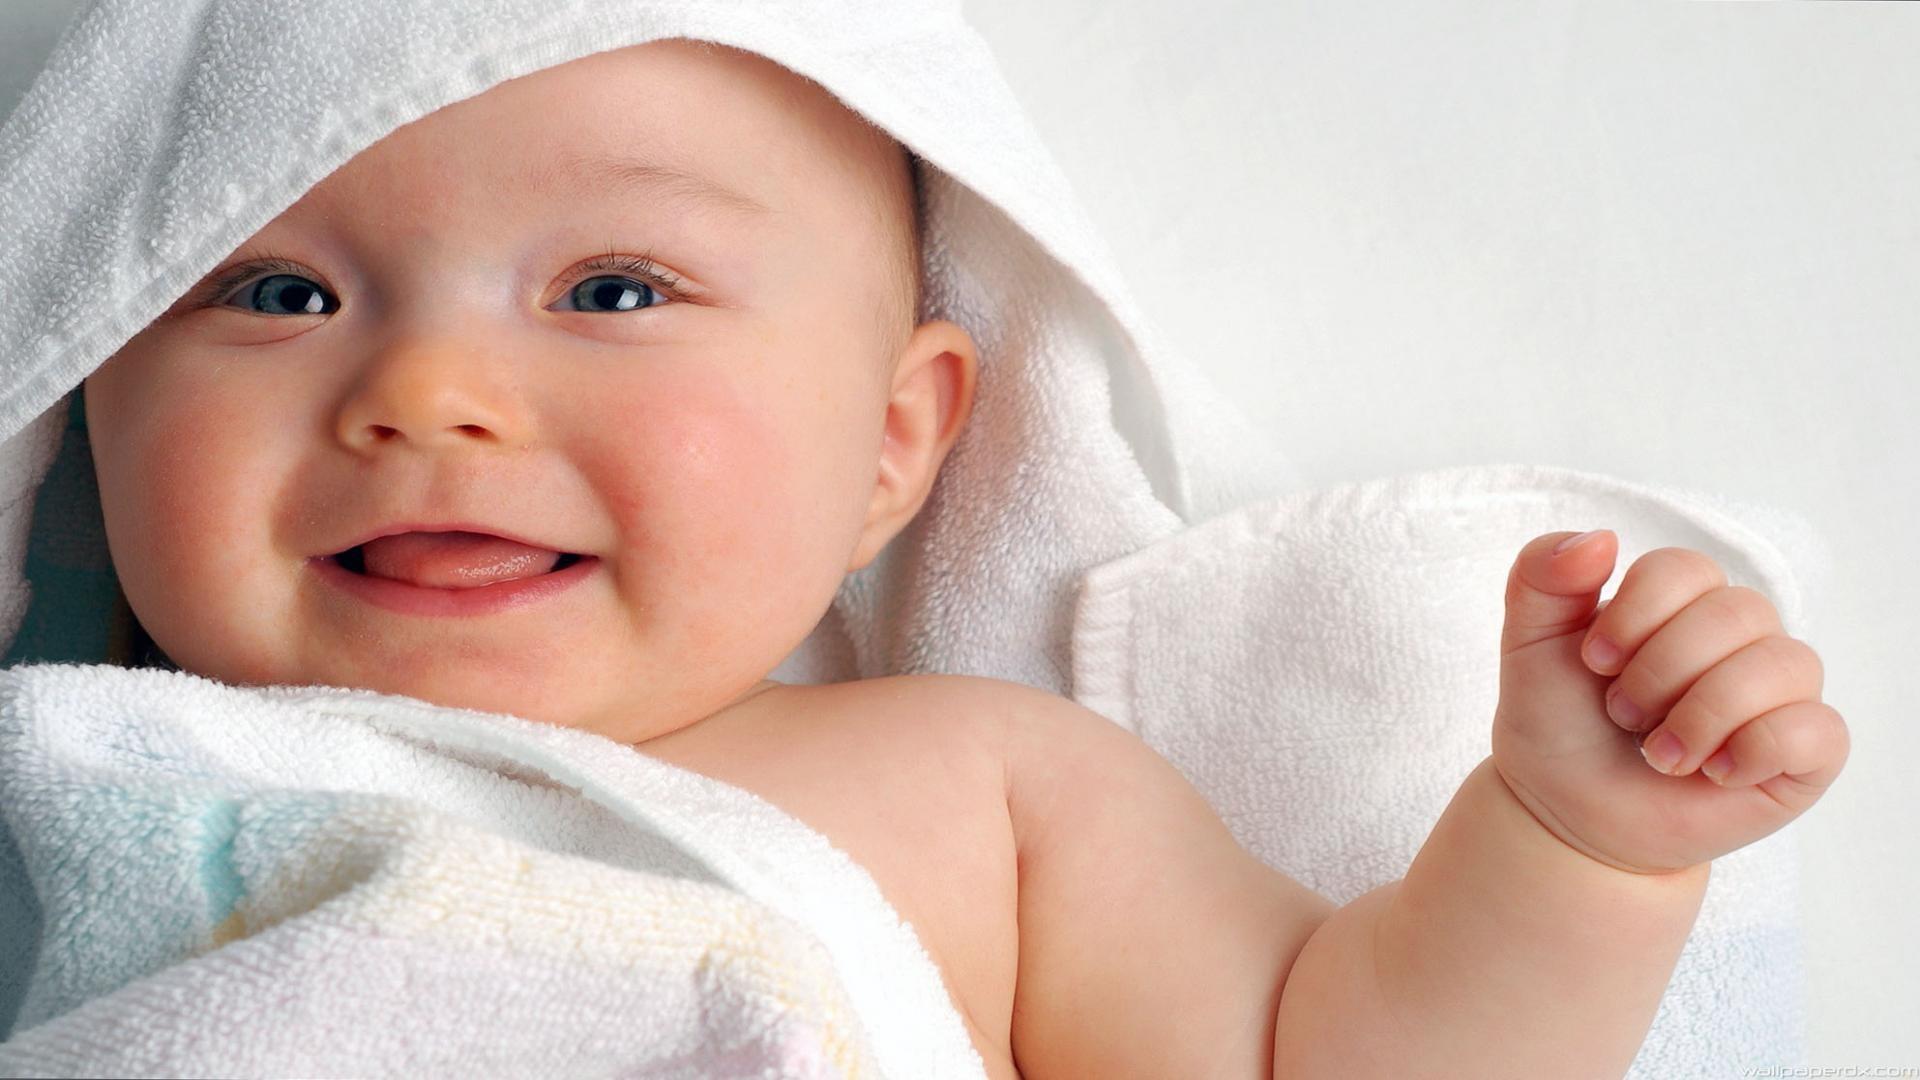 How to take monthly baby photos: A step-by-step practical guide